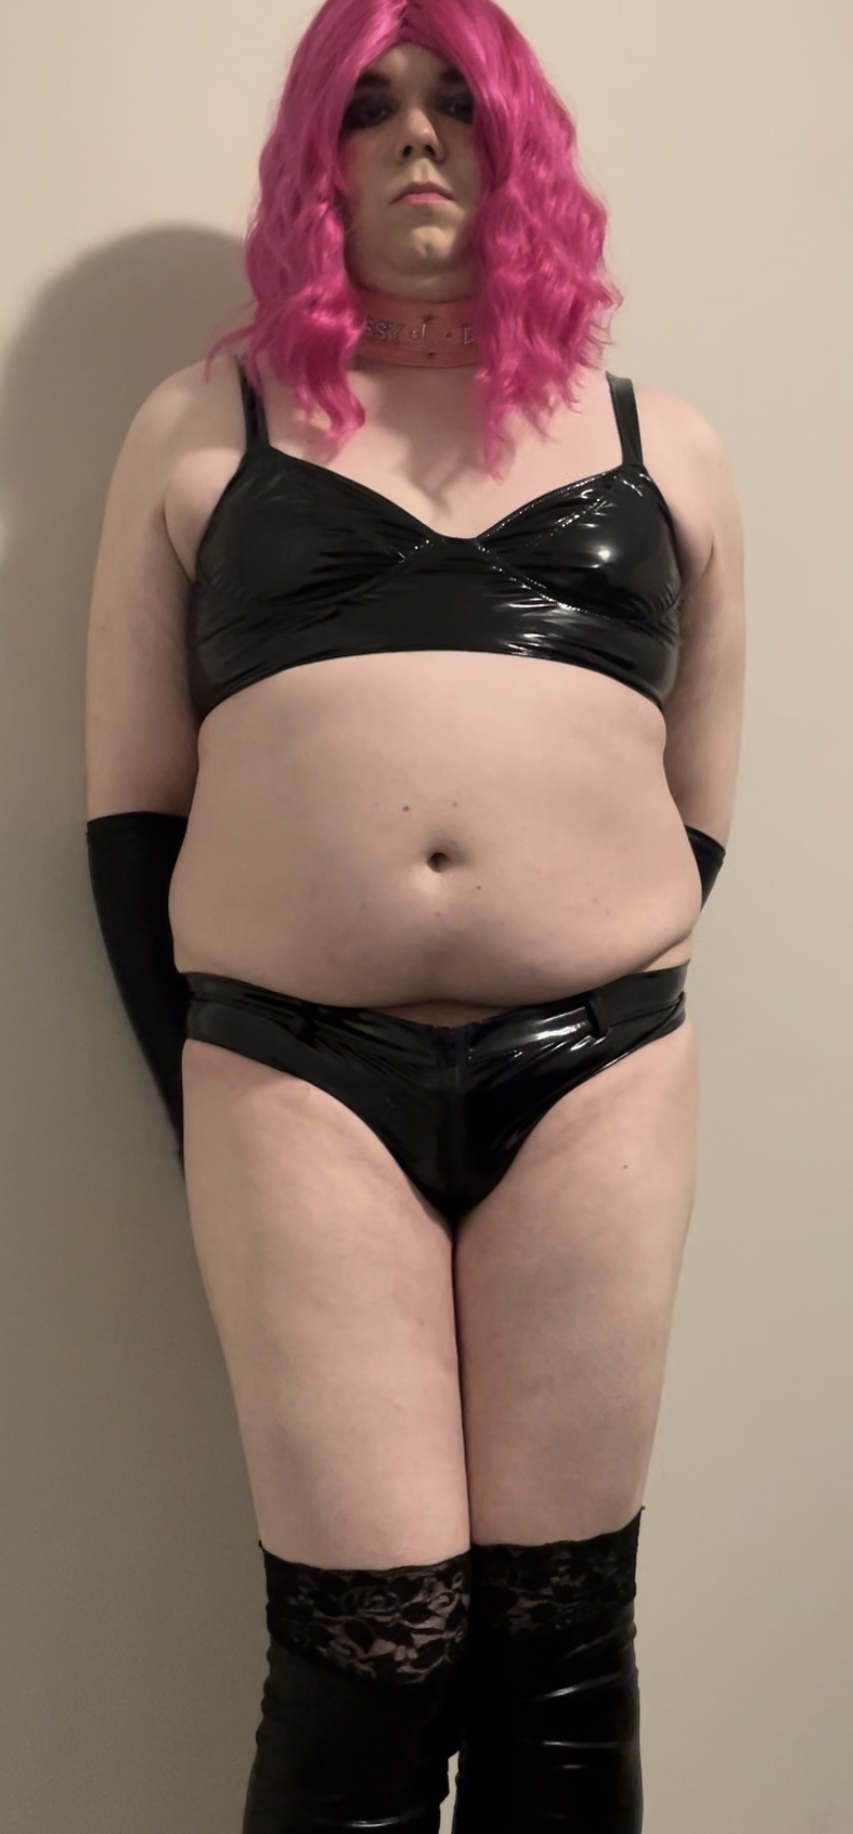 Chaste micropenis sissy rockin’ all leather